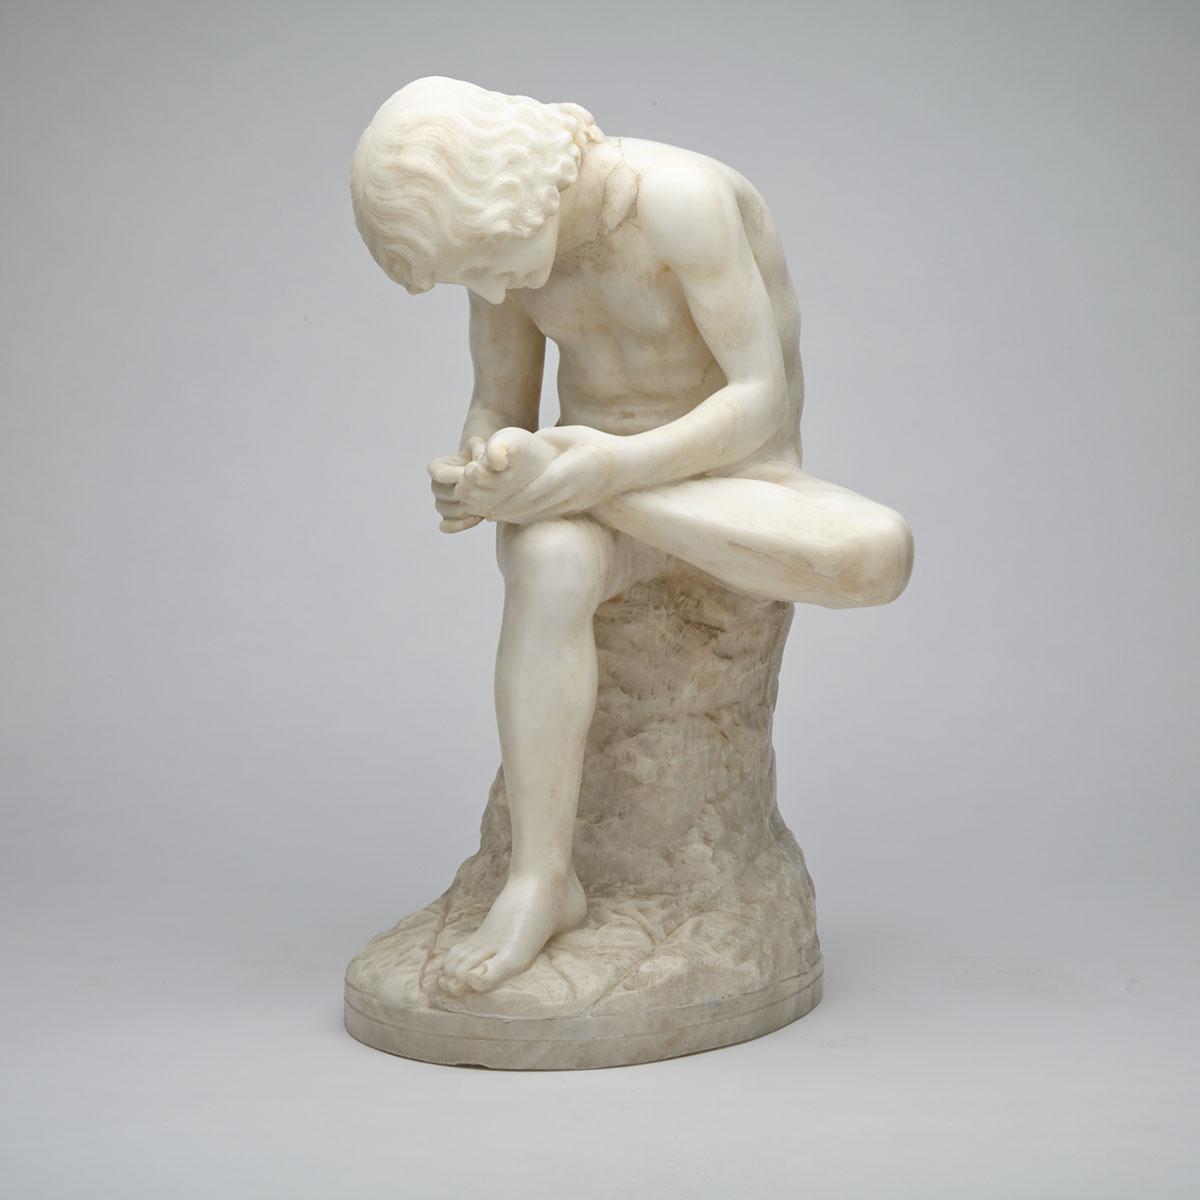 Italian Carrara Marble Model of the Spinario, After the Antique, 19th century